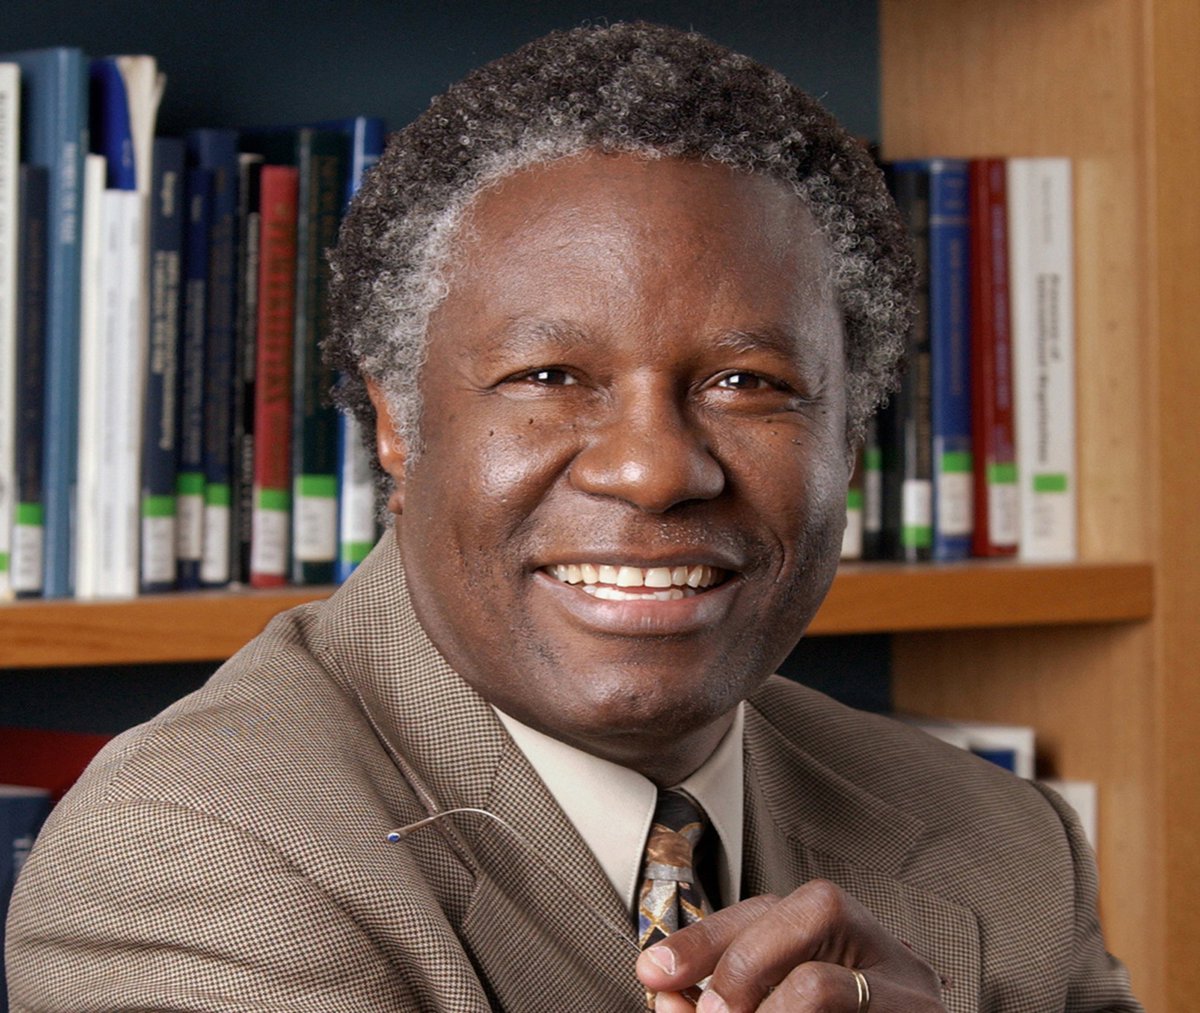 11/ Calestous Juma said it best: “The biggest risk that society faces by adopting approaches that suppress innovation is that they amplify the activities of those who want to preserve the status quo by silencing those arguing for a more open future.”  https://techliberation.com/2016/07/29/book-review-calestous-jumas-innovation-and-its-enemies/